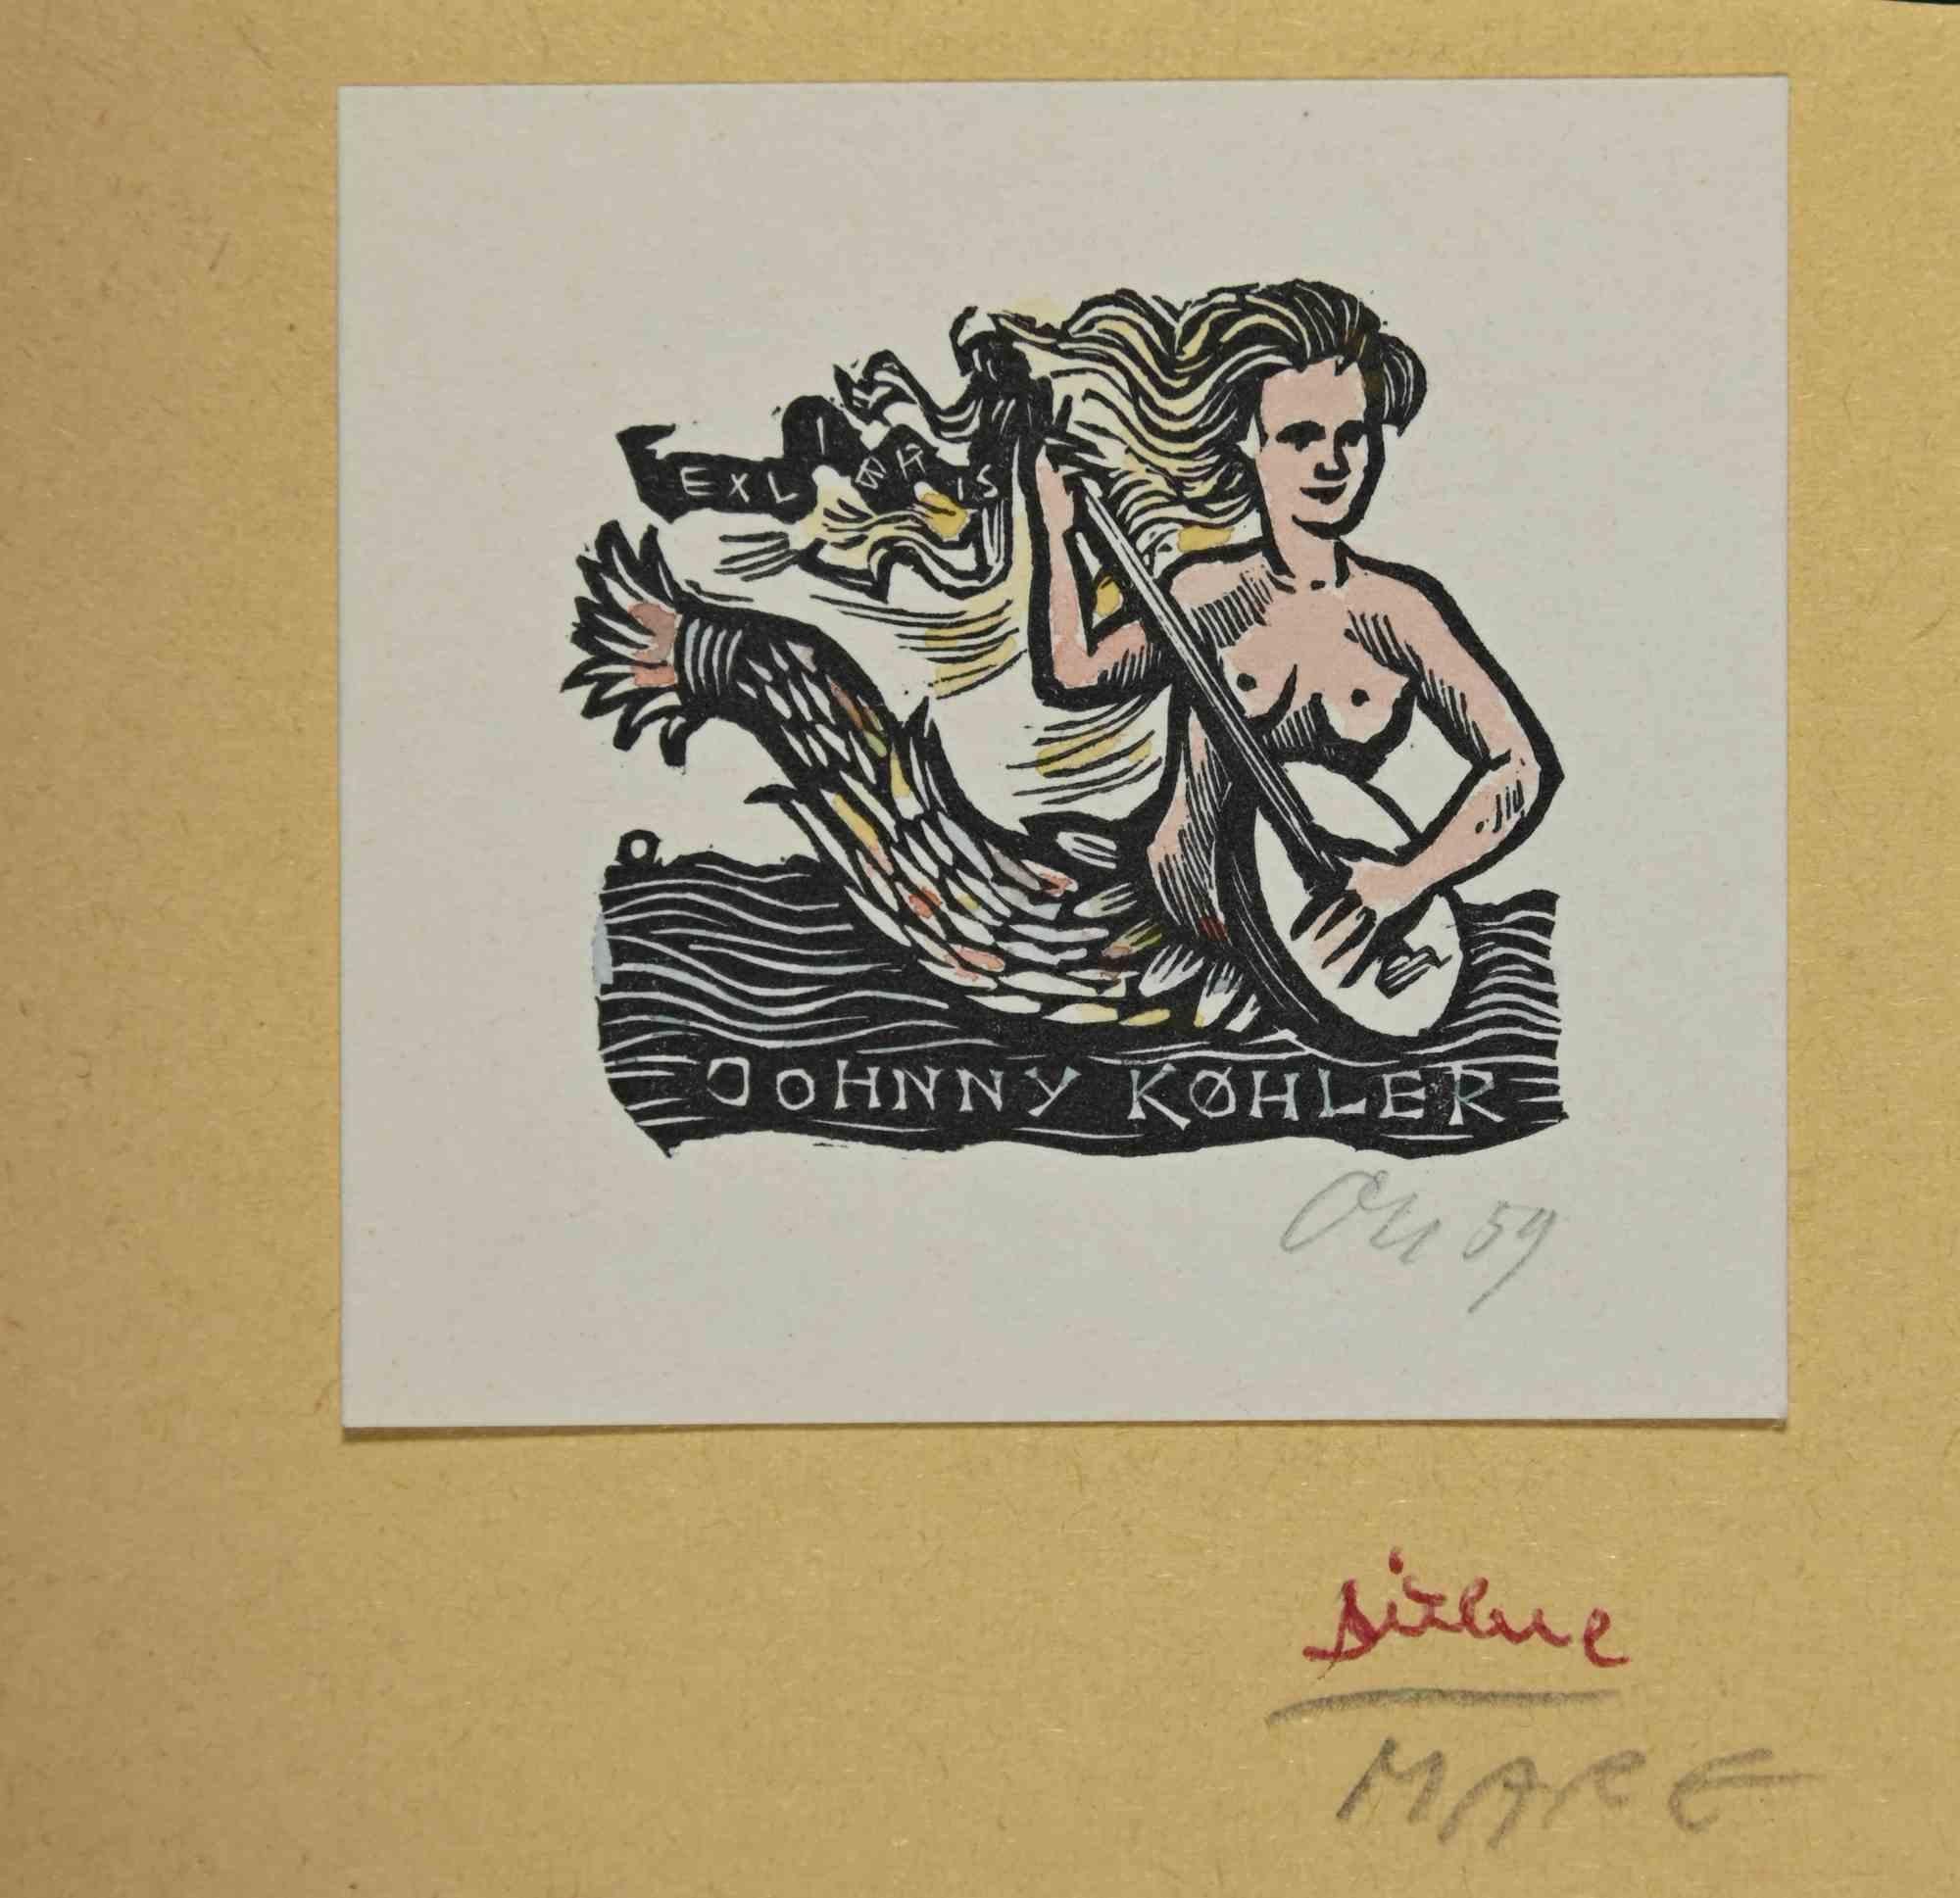 Ex-Libris - Johnny Køhler is an Artwork realized in 1959, by the Artist Herbert Ott, from Germany.

Woodcut on paper. Hand Signed and dated on the right margin.

The work is glued on colored  cardboard. Total dimensions: 9 x 9.5 cm.

Good